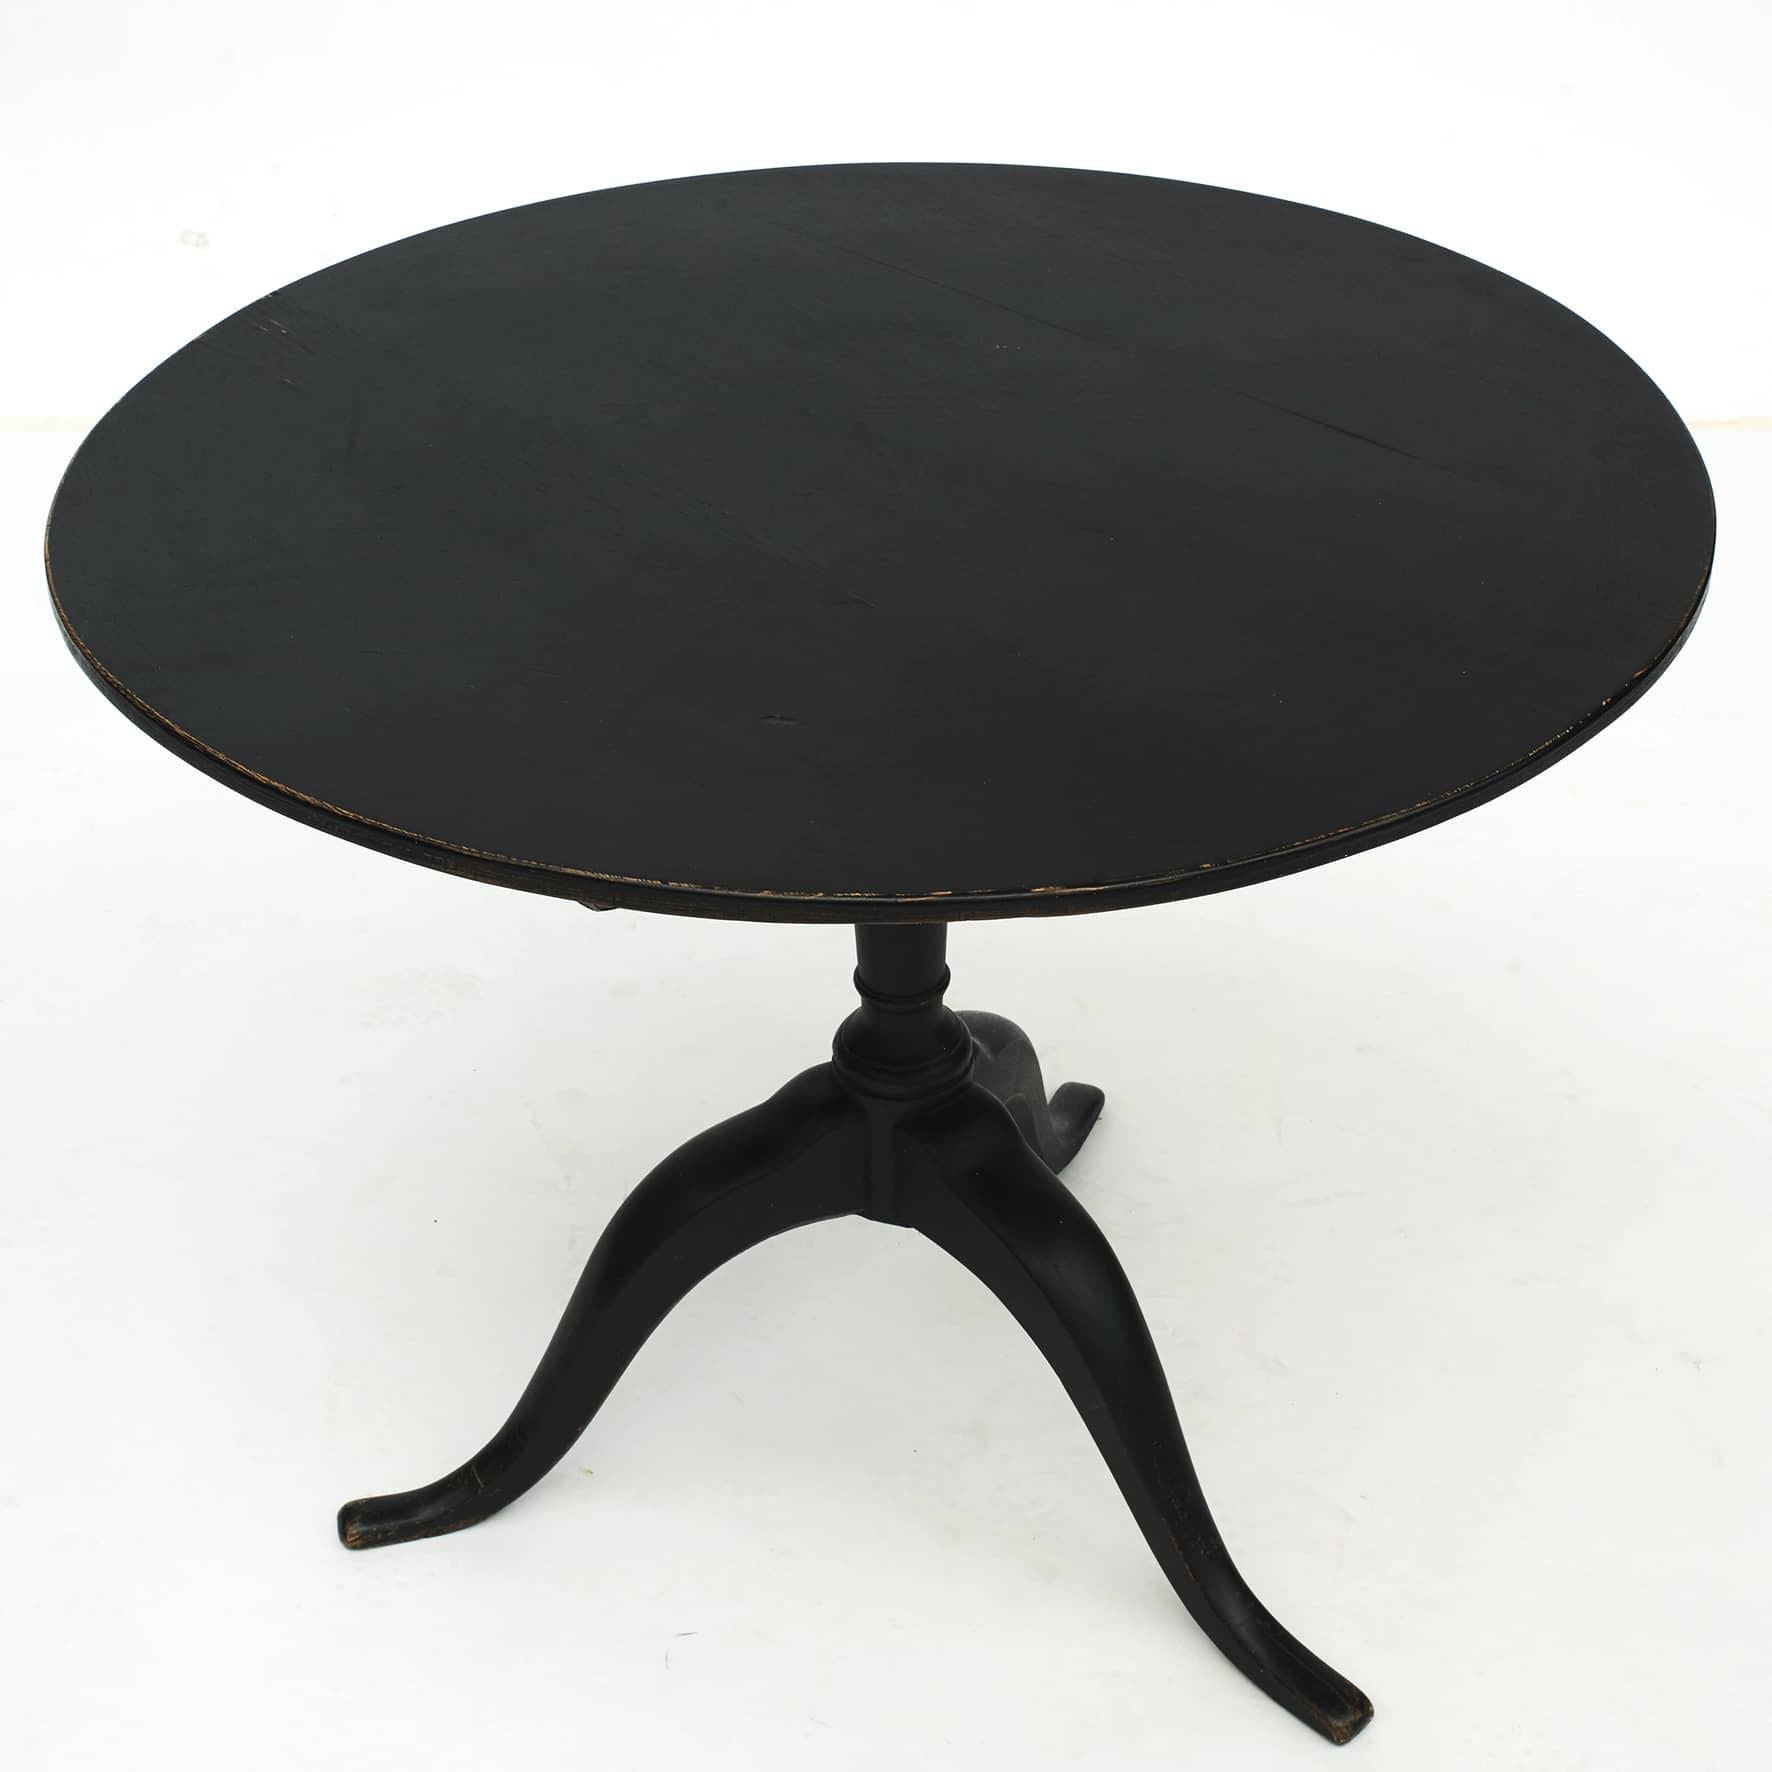 Elegant Swedish Empire tilt-top table crafted in black painted pine. Tapered and turned pedestal is supported by three legs for a tripod base, round tilting-top.
Sweden 1810-1820.